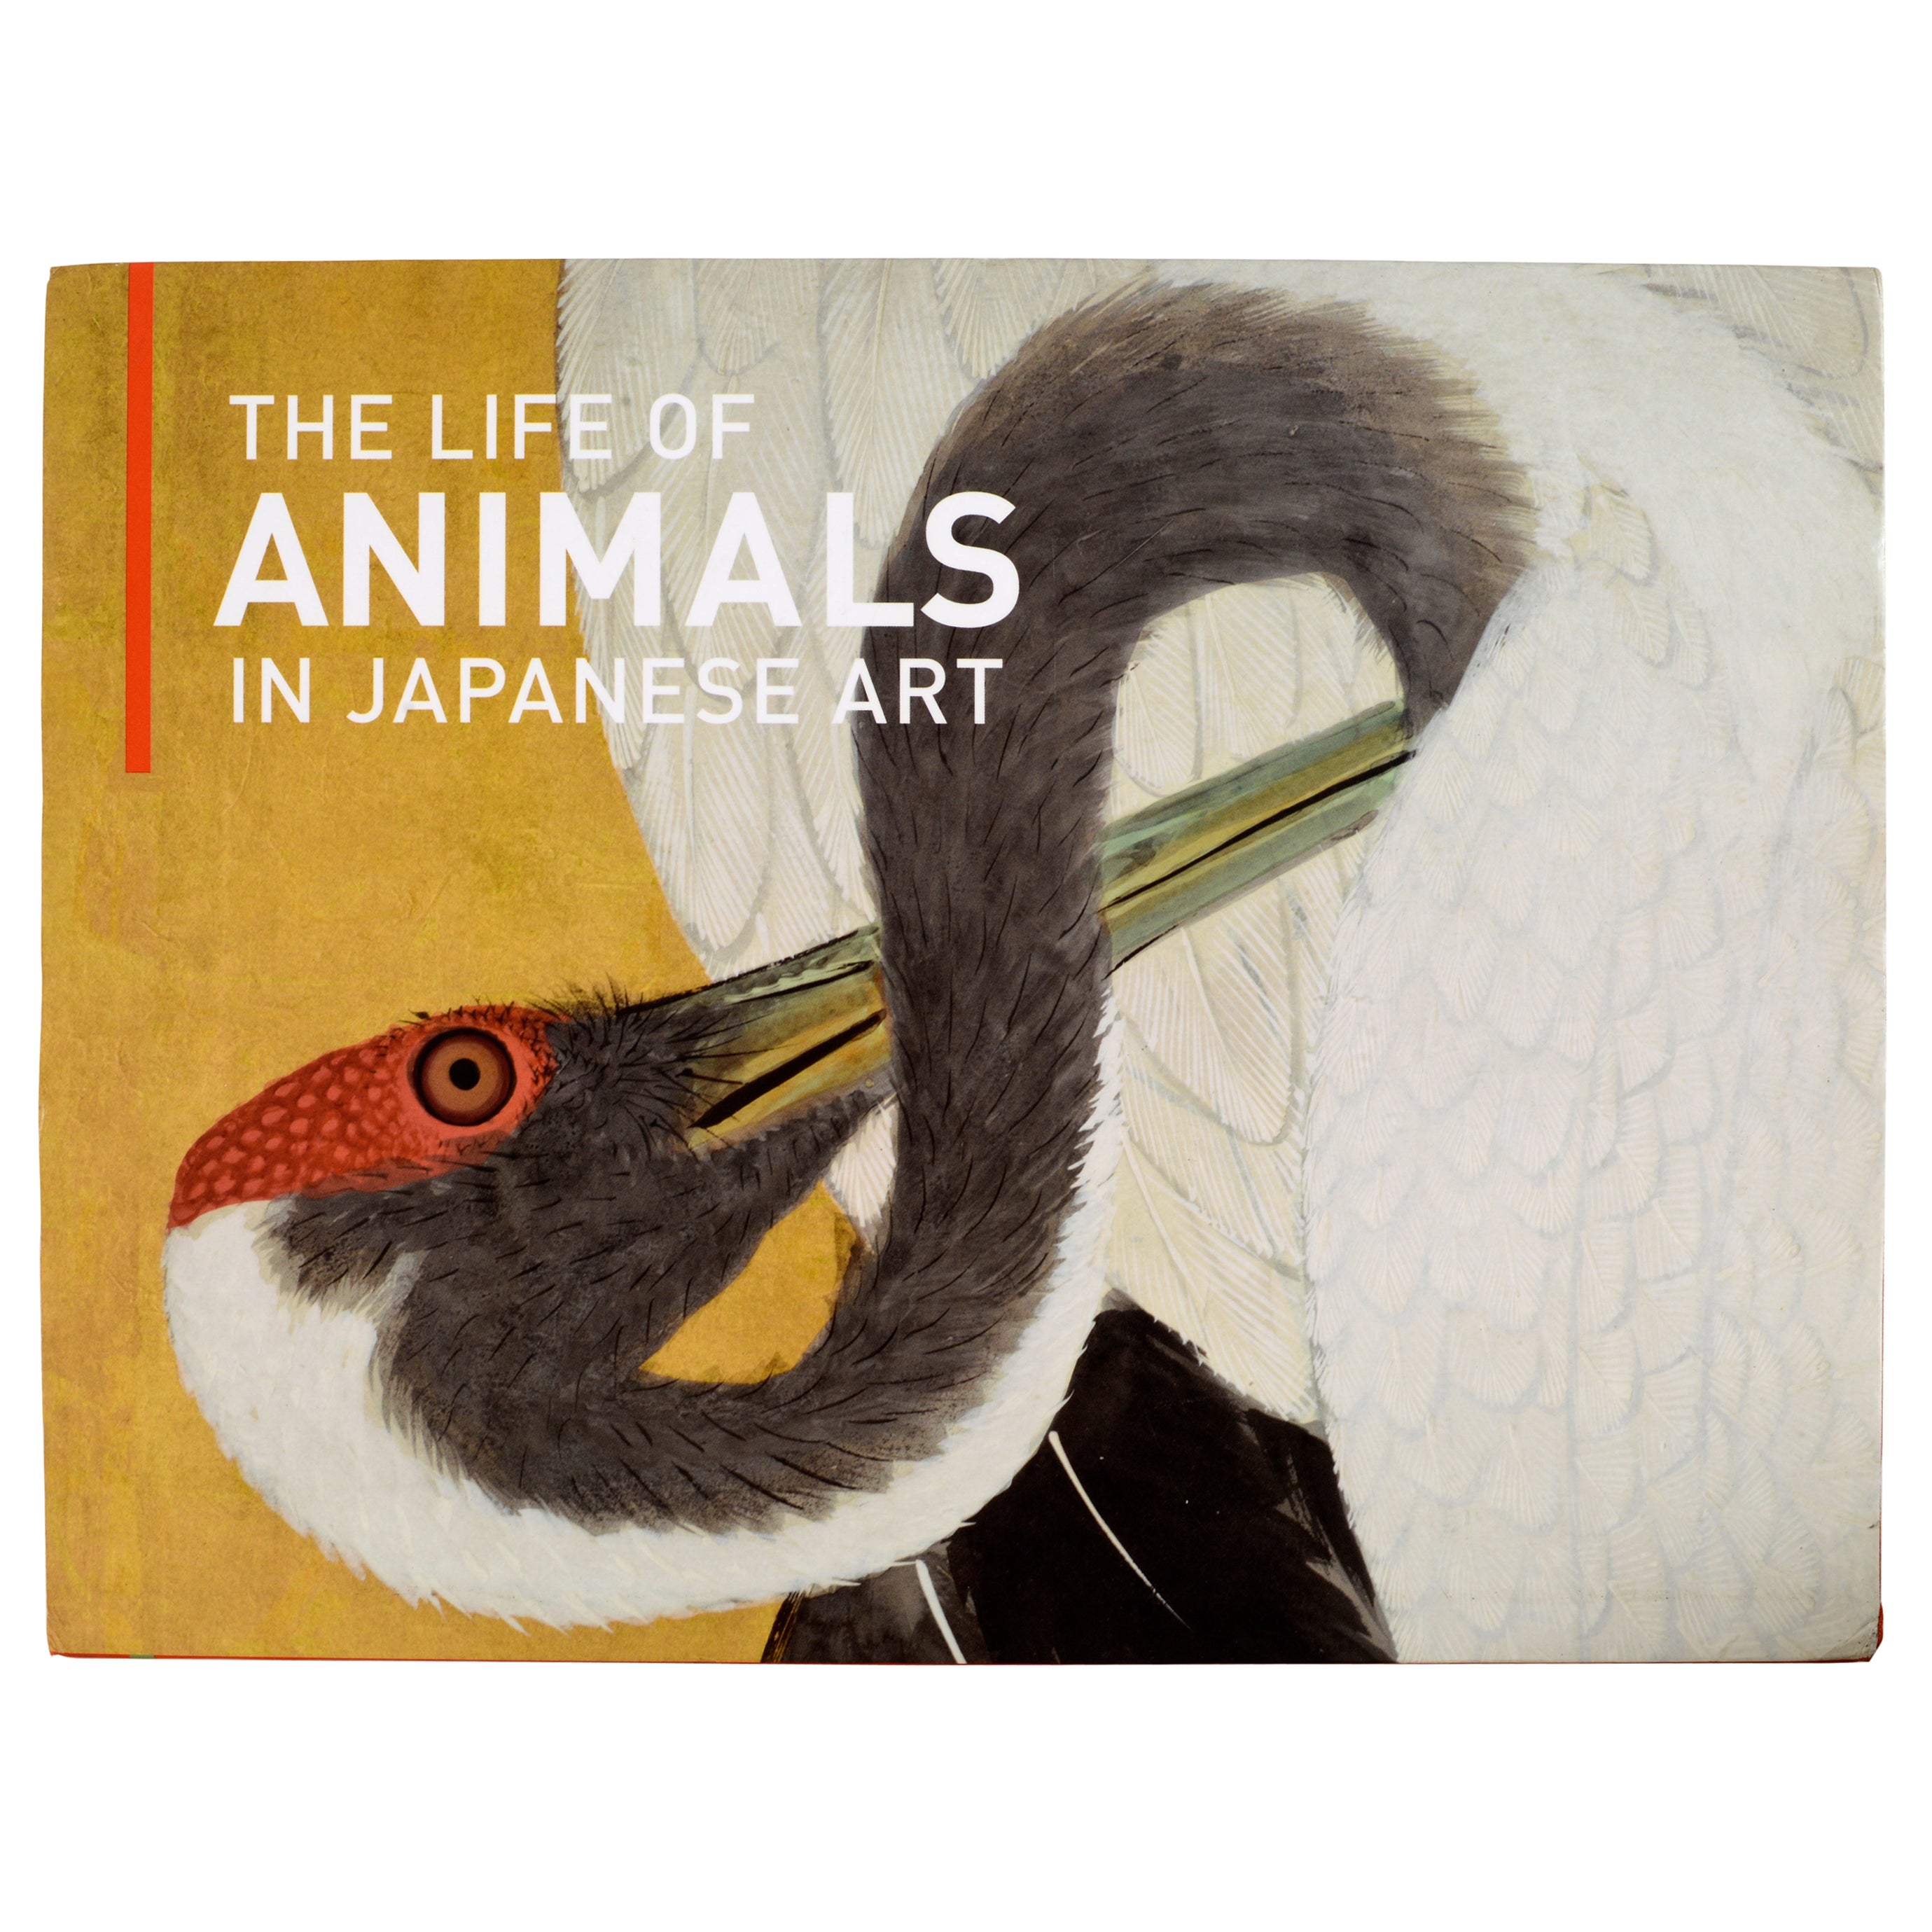 The Life of Animals in Japanese Art, 1st Ed